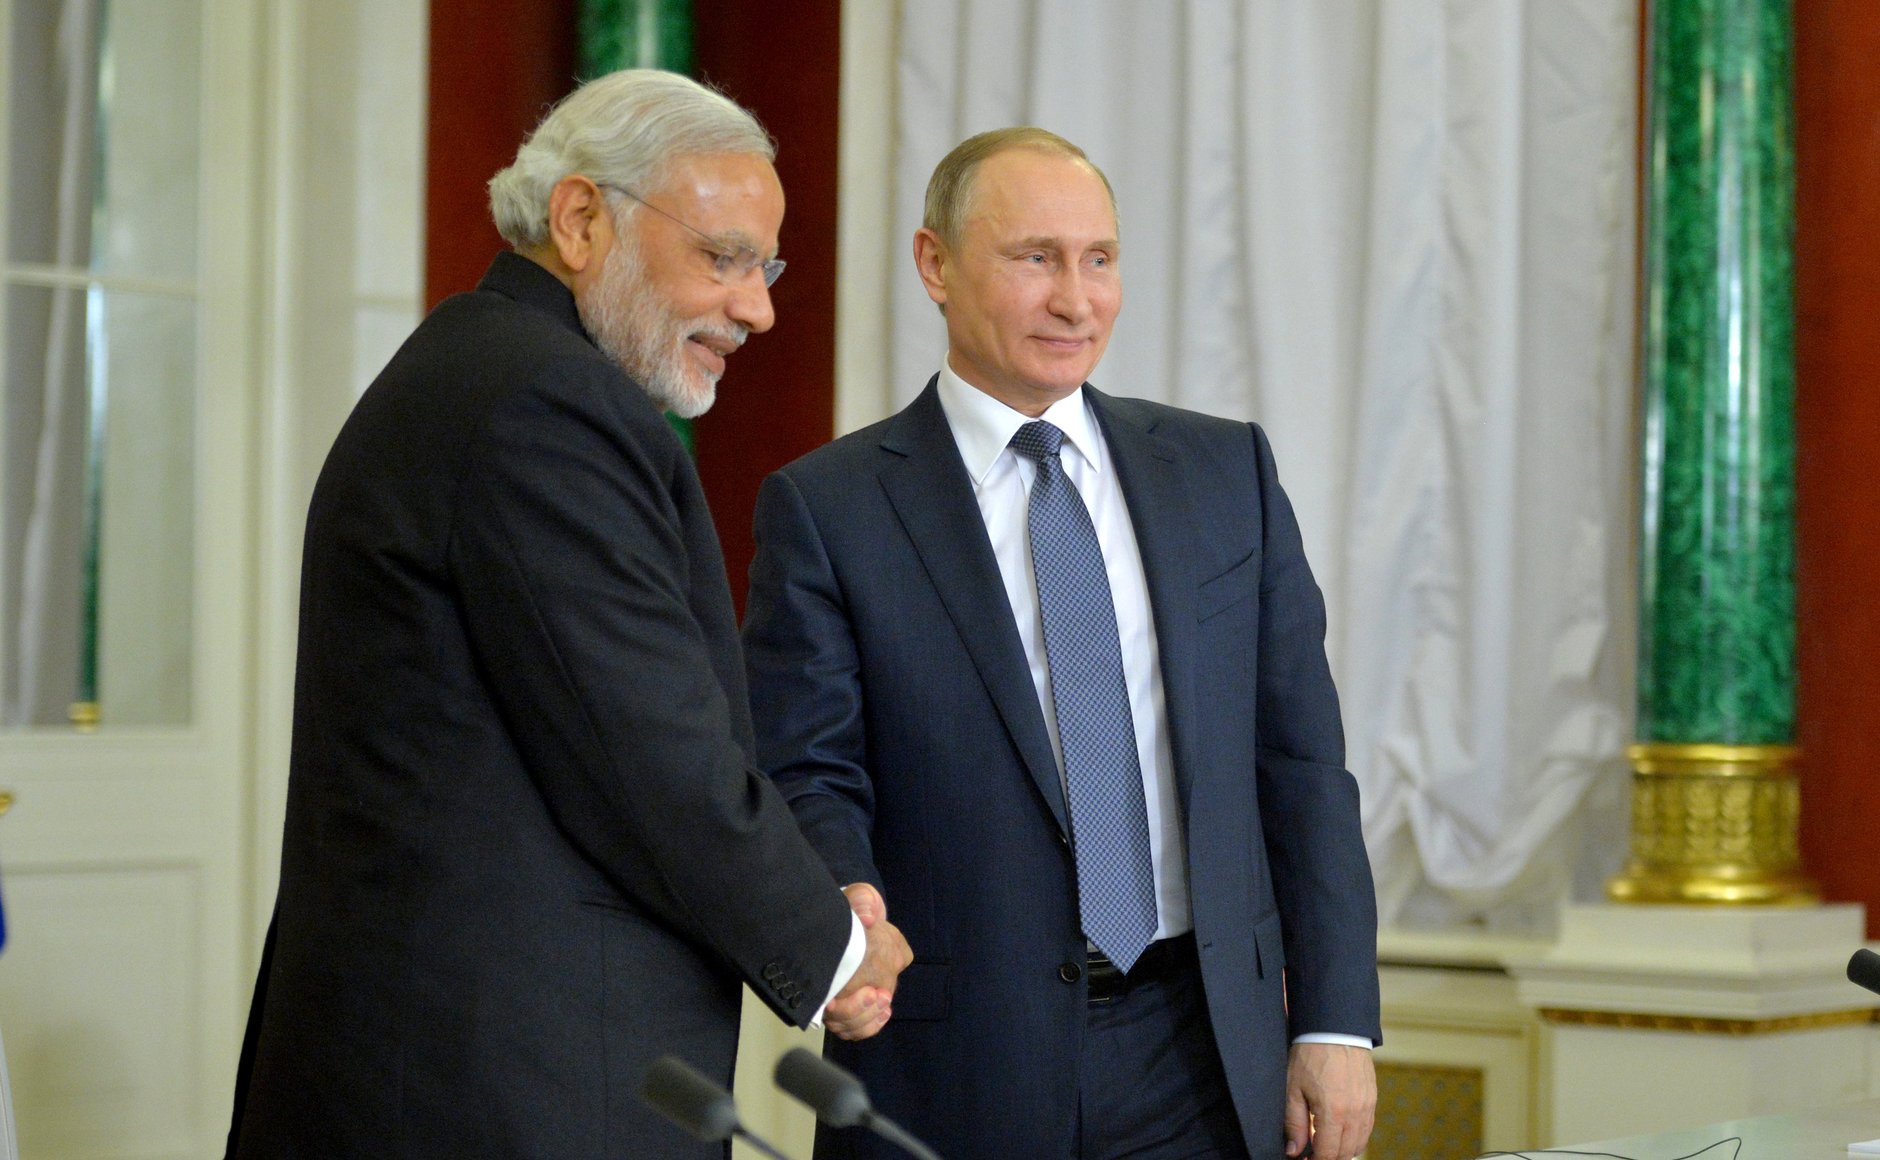 The India-Russia relationship is the one global partnership with very few differences.